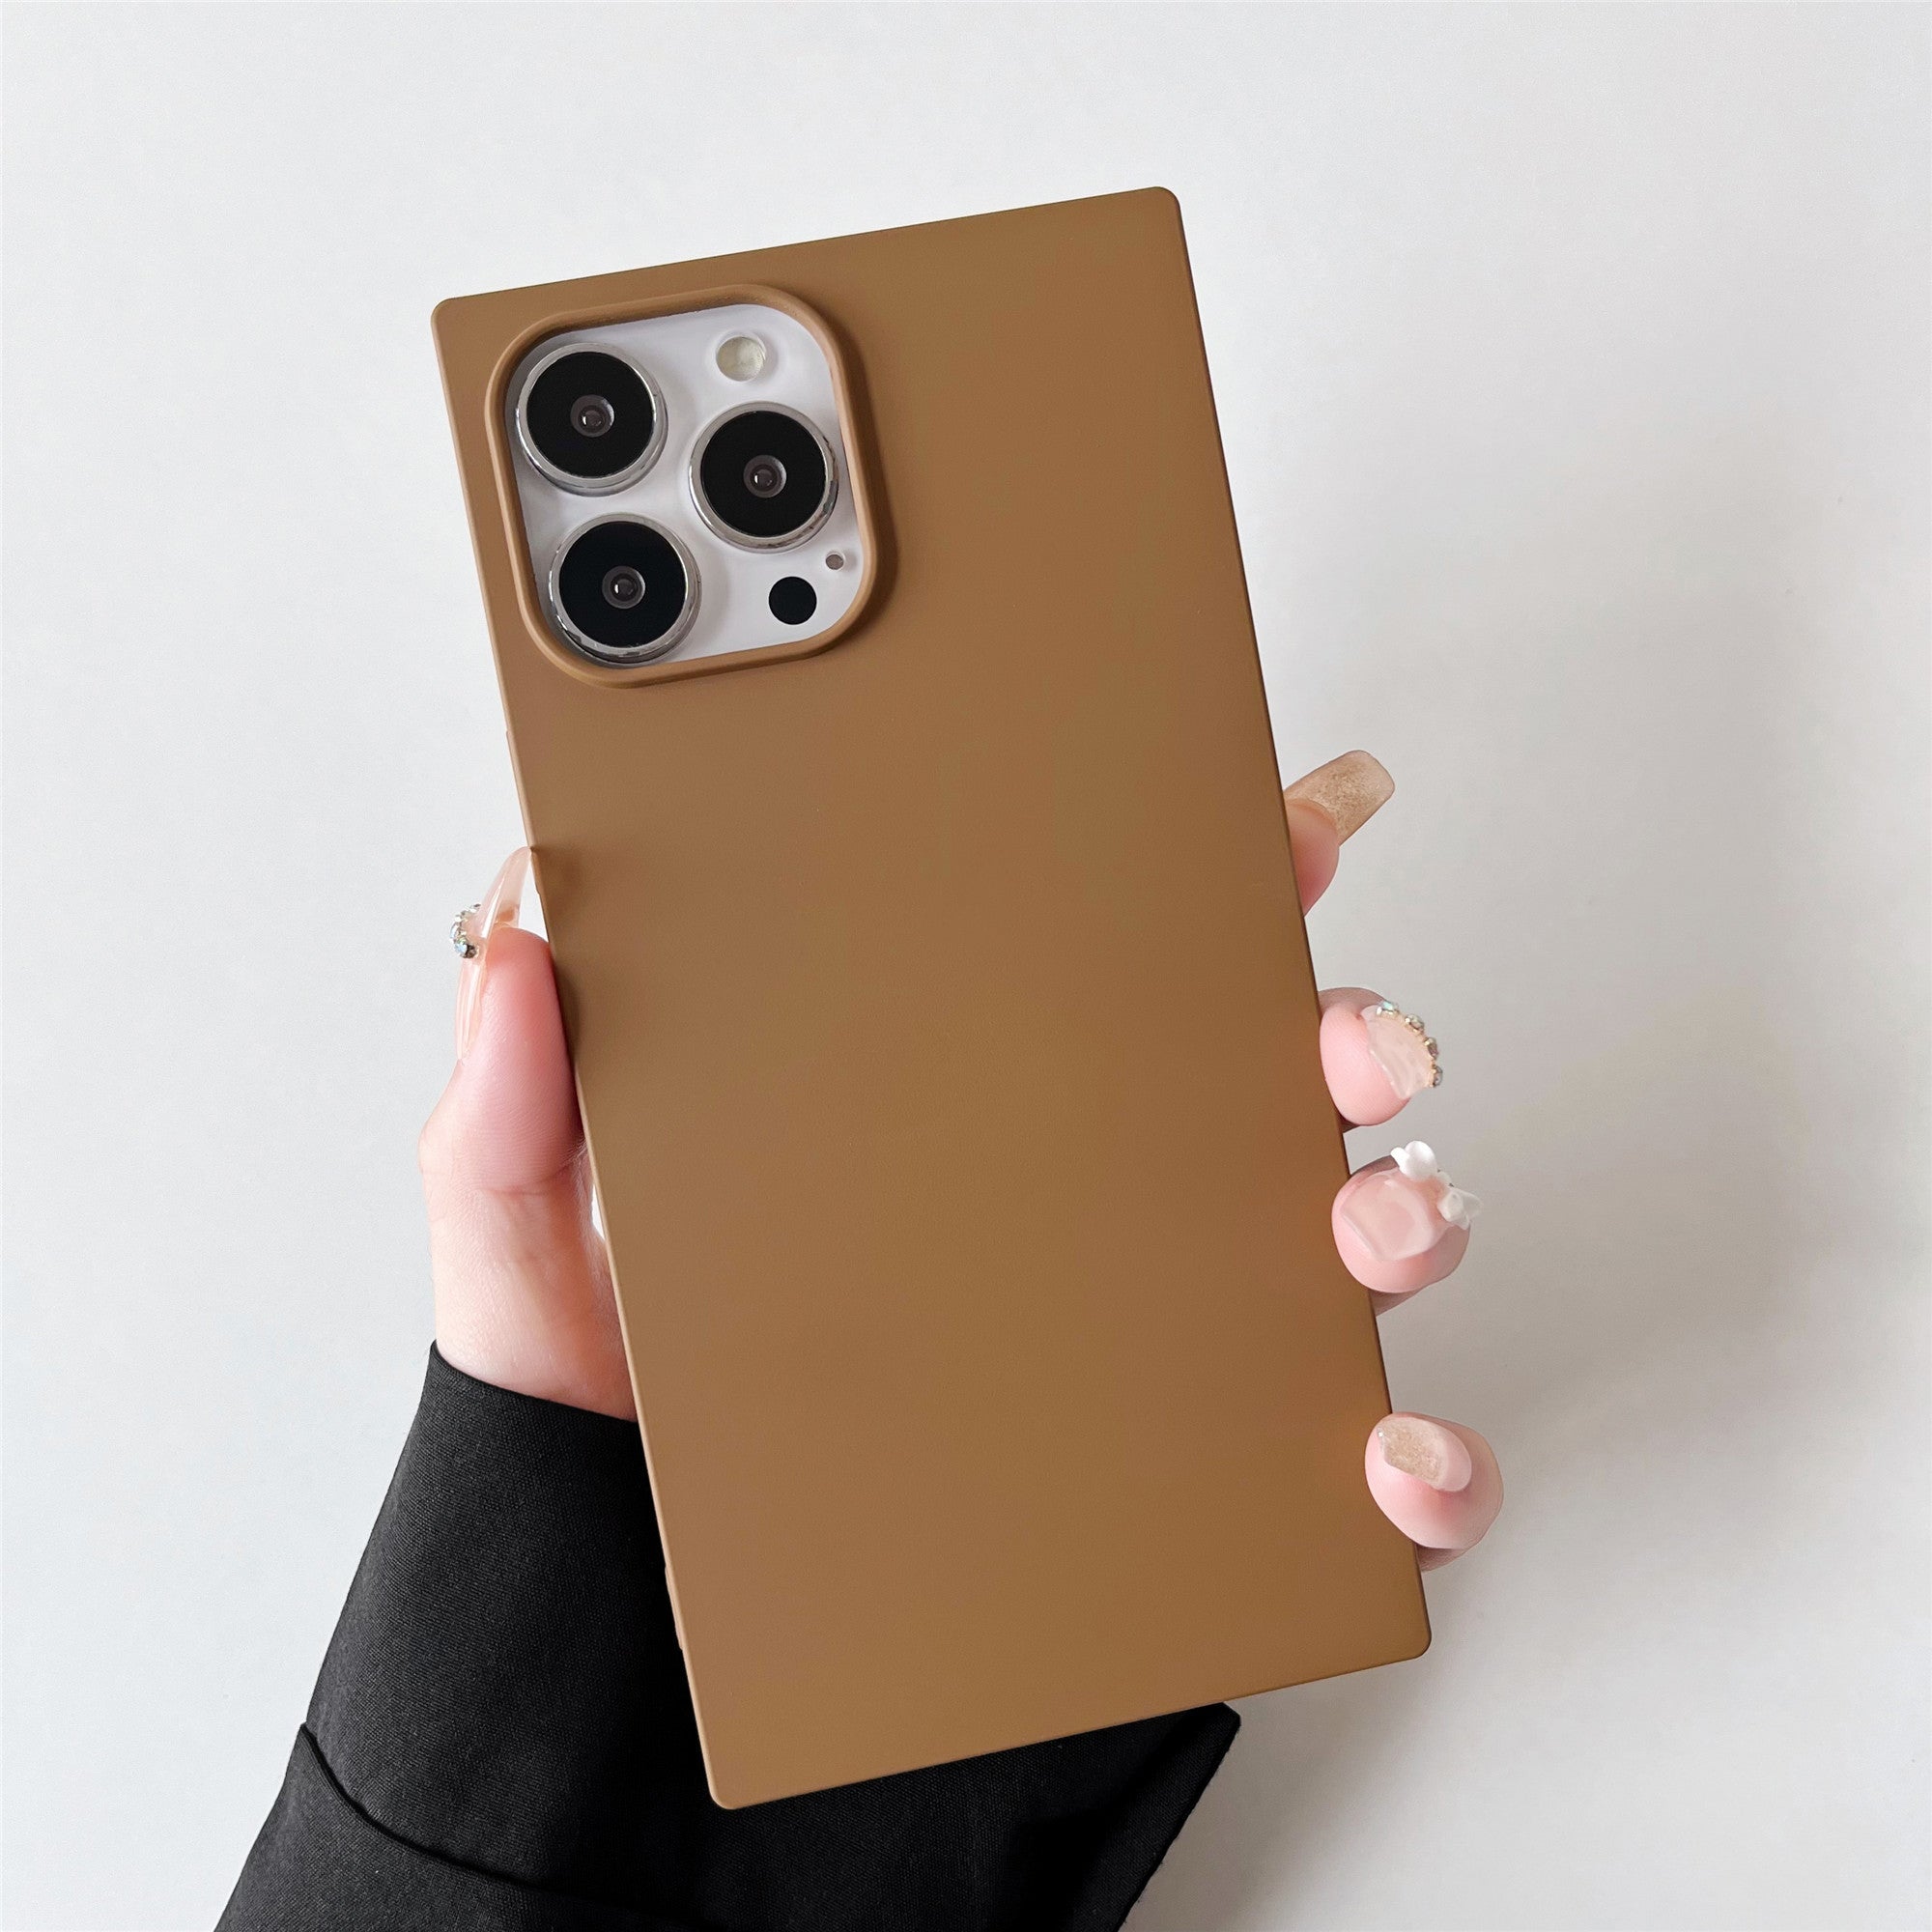 iPhone 11 Pro Max Case Square Silicone Neutral Color (Golden Brown)